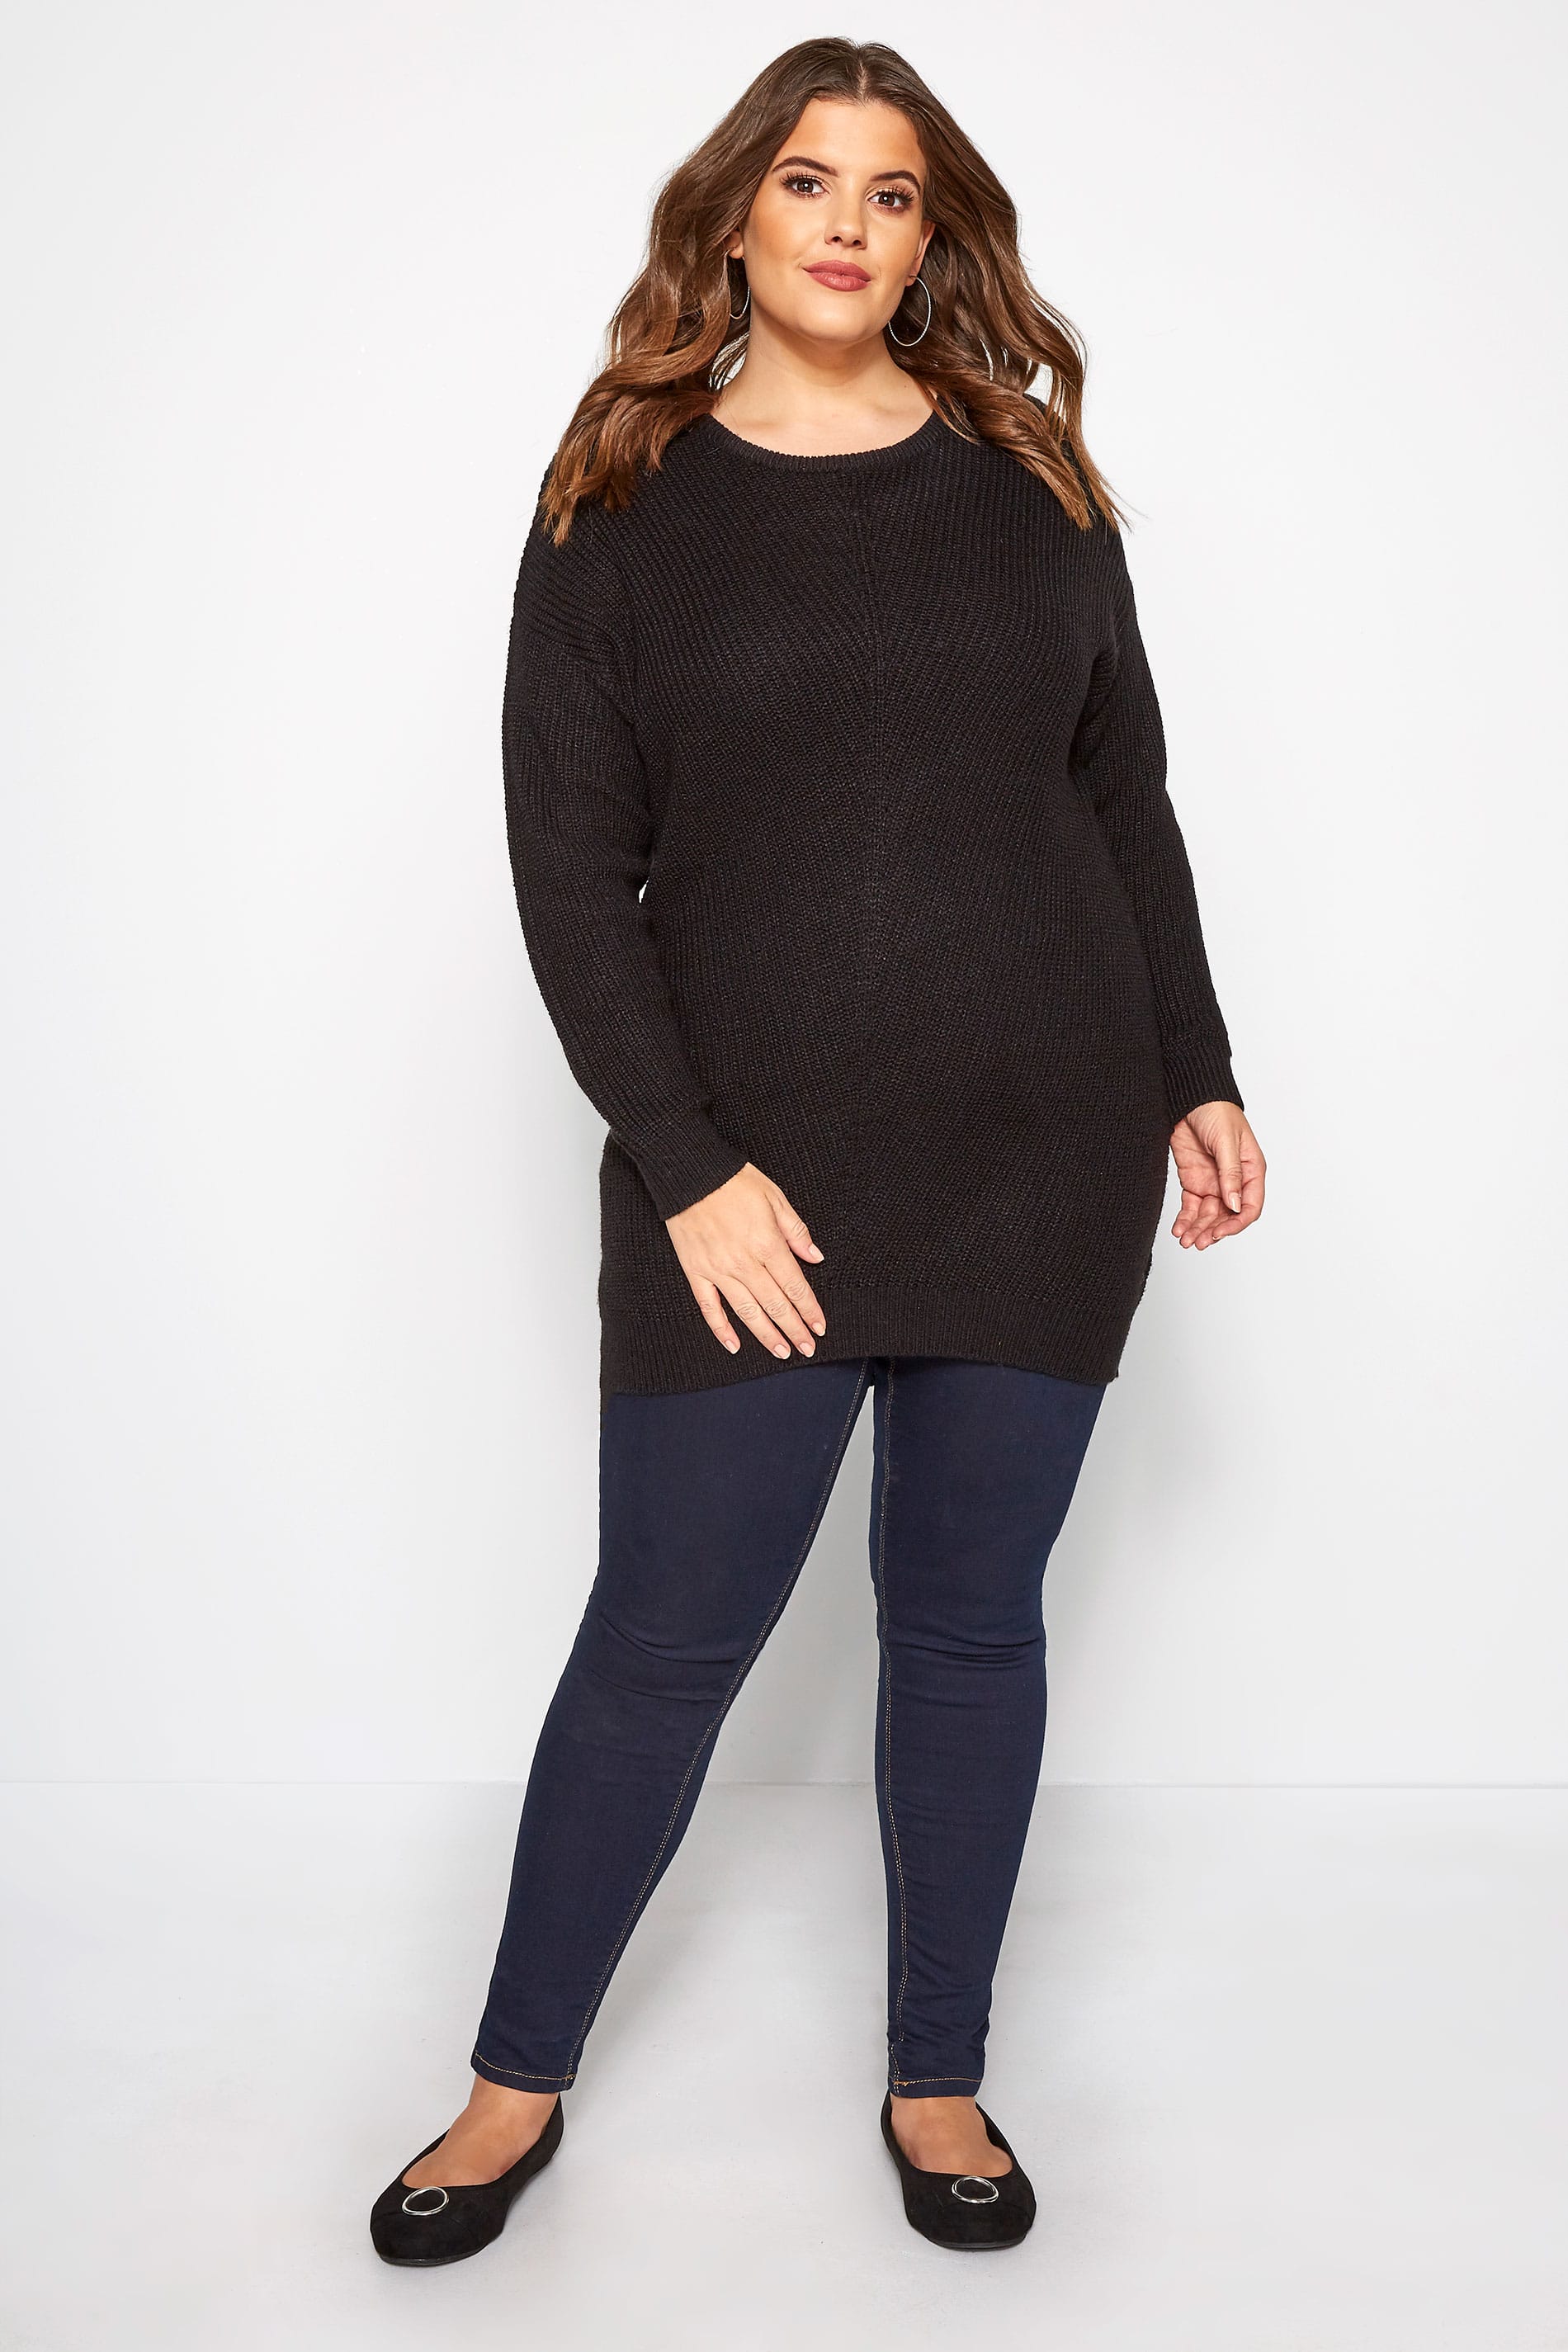 Black Chunky Knitted Jumper | Yours Clothing